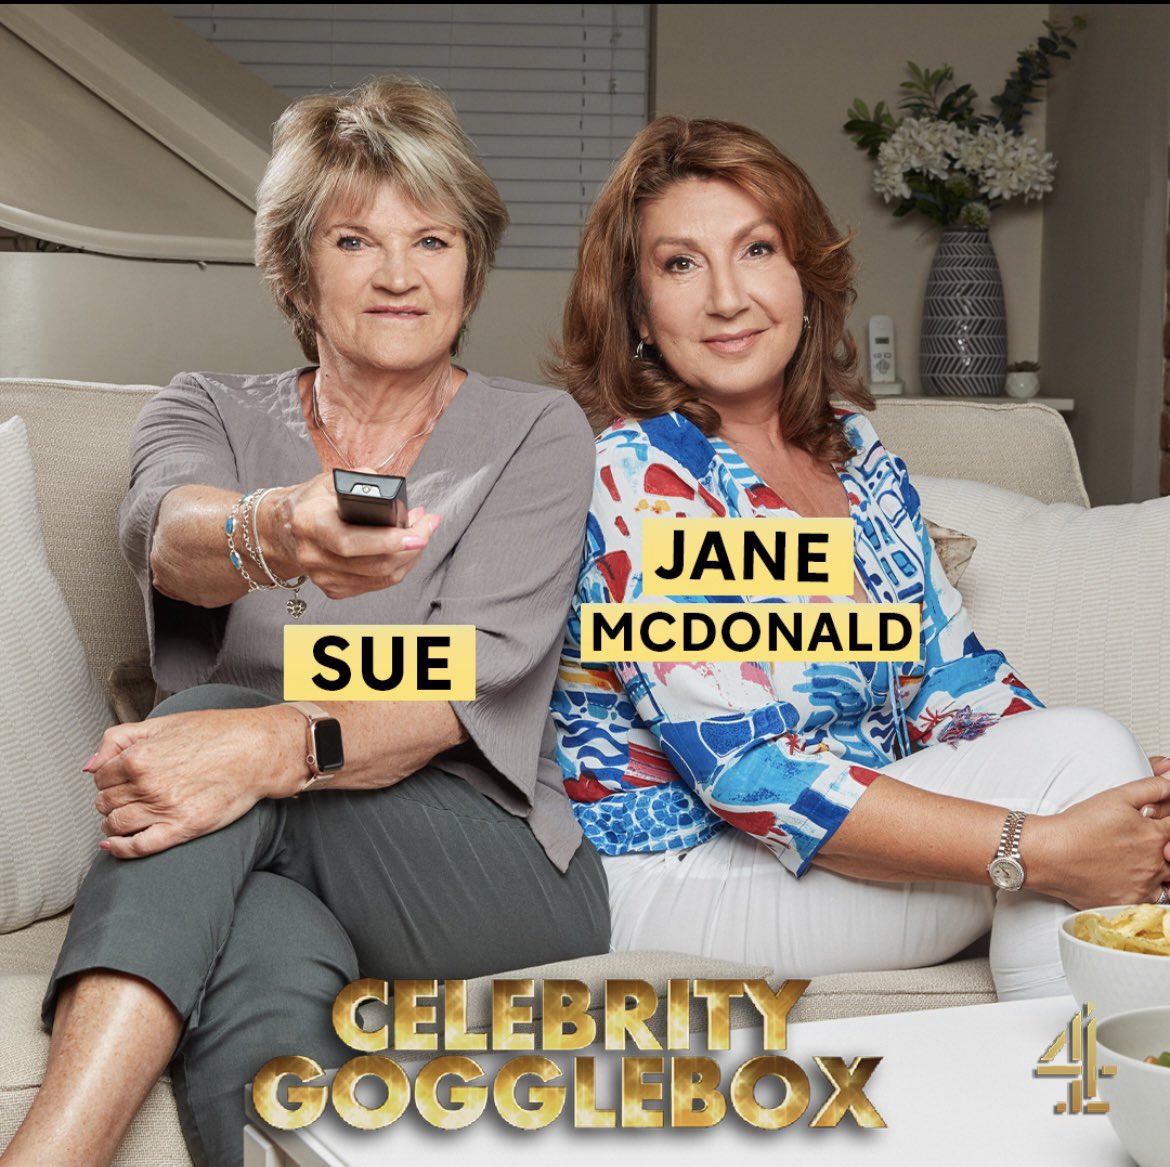 Sue and I are back on Celebrity Gogglebox! Turn the TV on and get the snacks ready!! The new series starts on Friday 7th June at 10.10pm on @Channel4